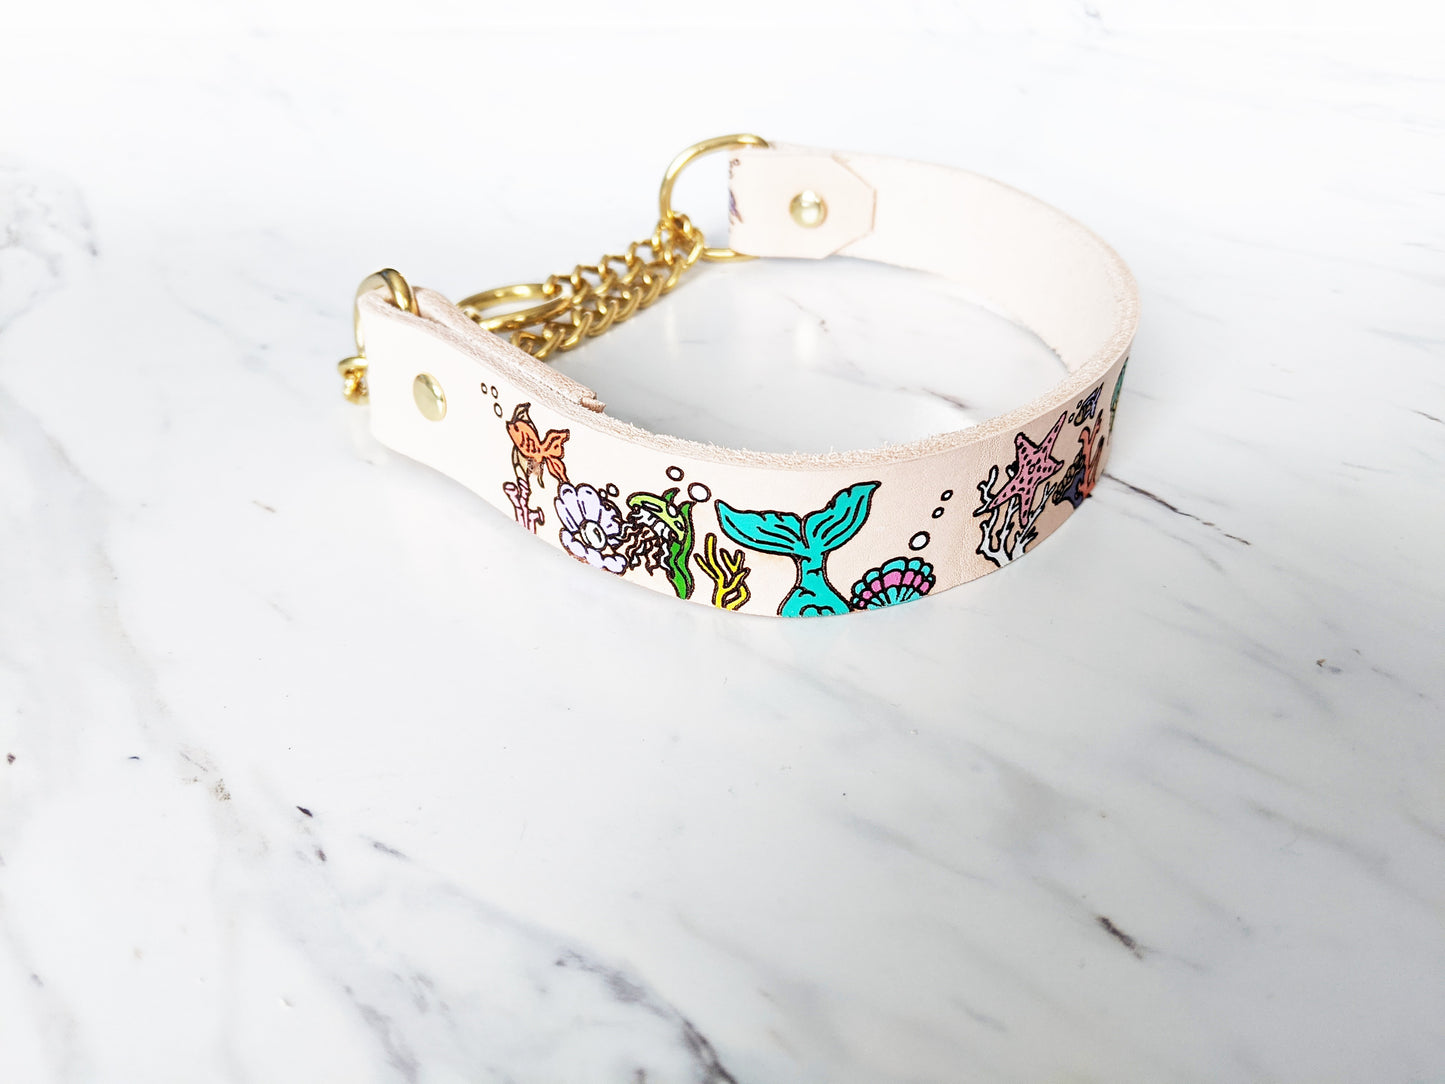 Under The Sea - Leather Martingale Collar